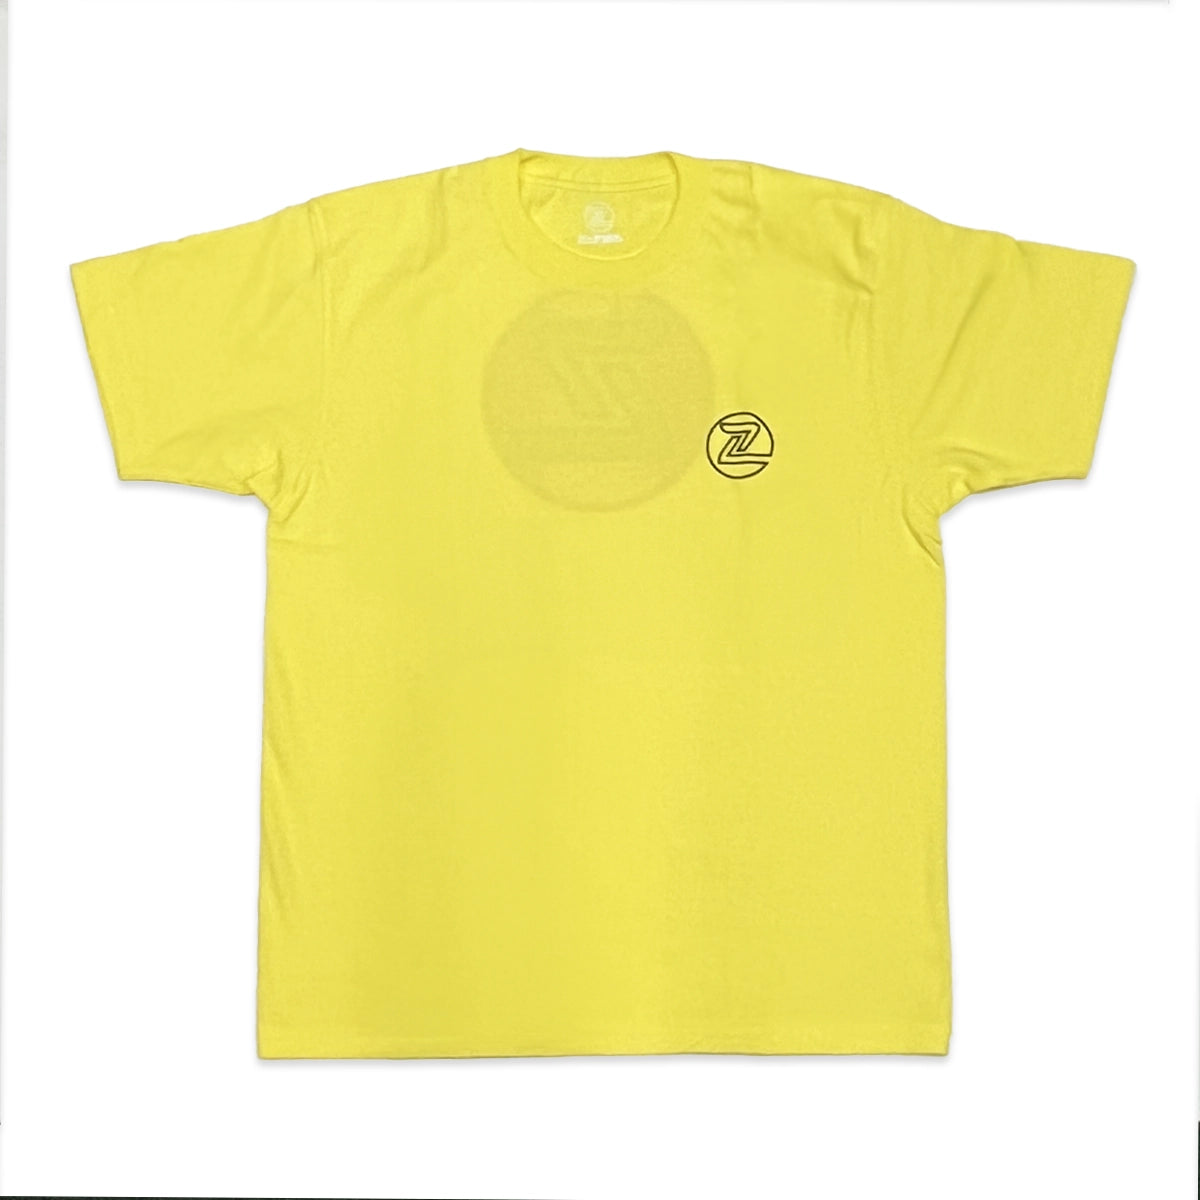 ■Z-TRAINBOW2 T-SHIRTS YELLOW-Z-FLEX SKATEBOARDS JAPAN OFFICIAL【公式通販】